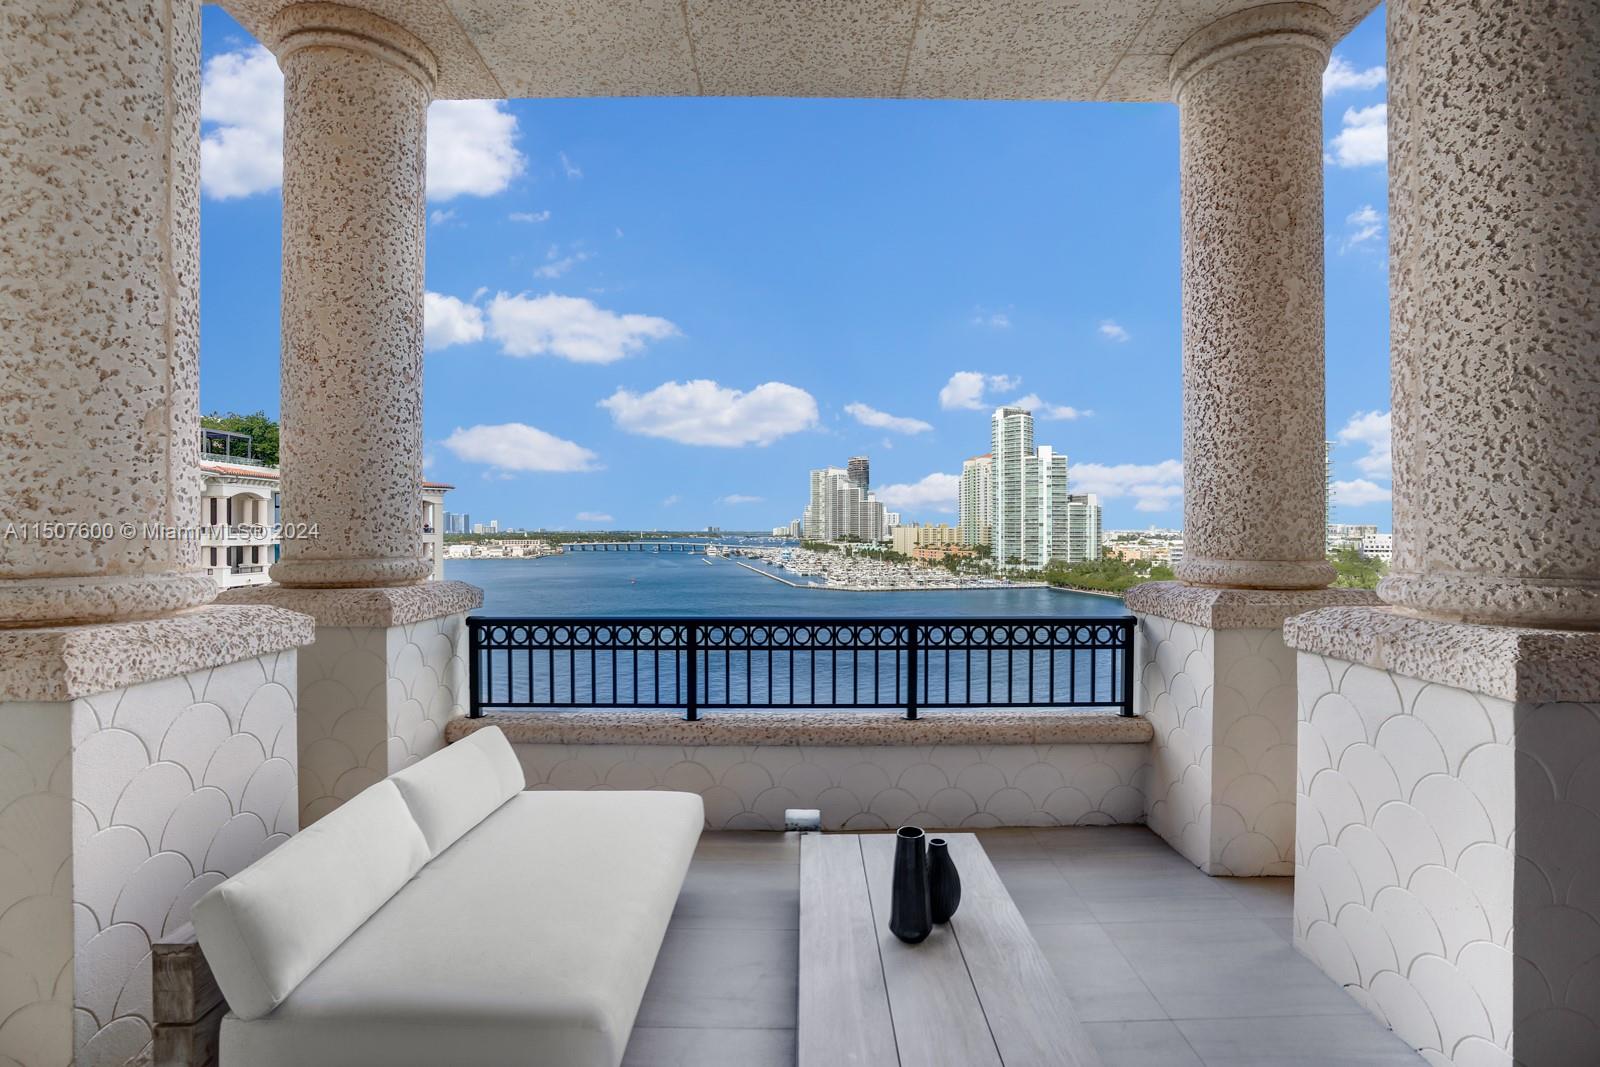 Step Inside With Me! Sol Penthouse I on the ultra exclusive 216-acre Fisher Island. The definition of design and grandeur, this sky estate totals 5 suites and 7,000 SF of crafted interiors. The opulent foyer opens to a great room with soaring ceilings and oak herringbone flooring. Impeccably positioned toward the sunset, skyline, and ocean, views are enhanced by picturesque glass pocket doors. Four glamorous social areas include a hosting salon, bayfront bar, TV room, and formal dining. The sleek contemporary Gaggenau kitchen displays a dine-in island, wine cellar & Art Deco detailed hood. Equipped with a Bang & Olufsen sound system, the media den is the ultimate viewing experience. The terraces offer an additional 5,000+ SF with a rooftop pool, hot tub, firepit & Summer Kitchen.